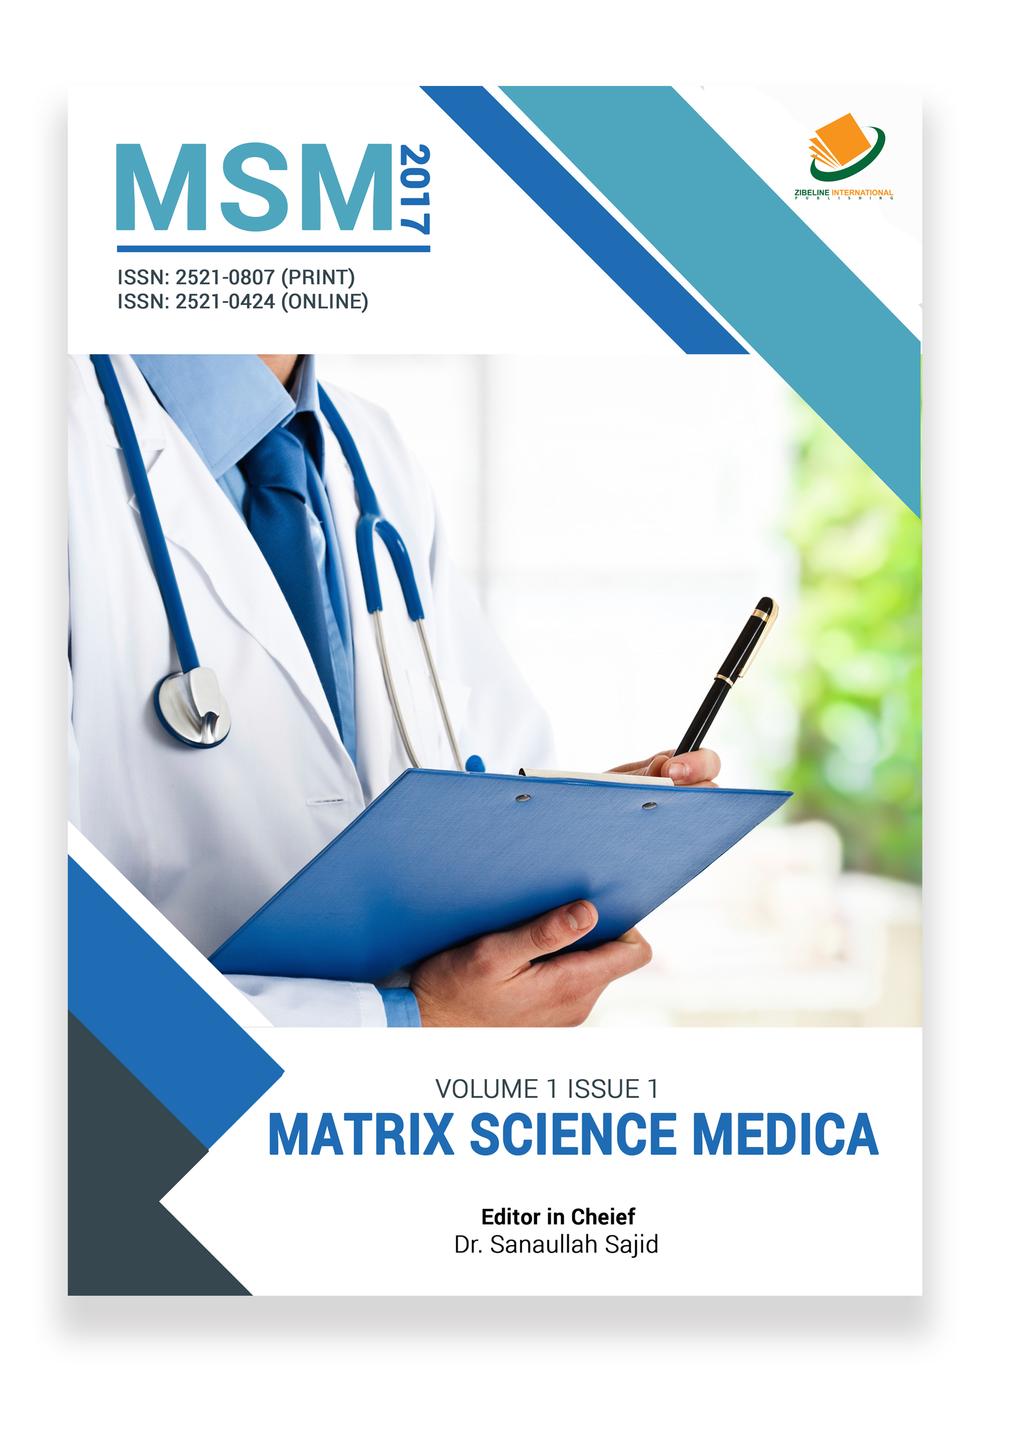 MATRIX SCIENCE MEDICA () Medicine is the science and practice of the diagnosis, treatment and prevention of disease.